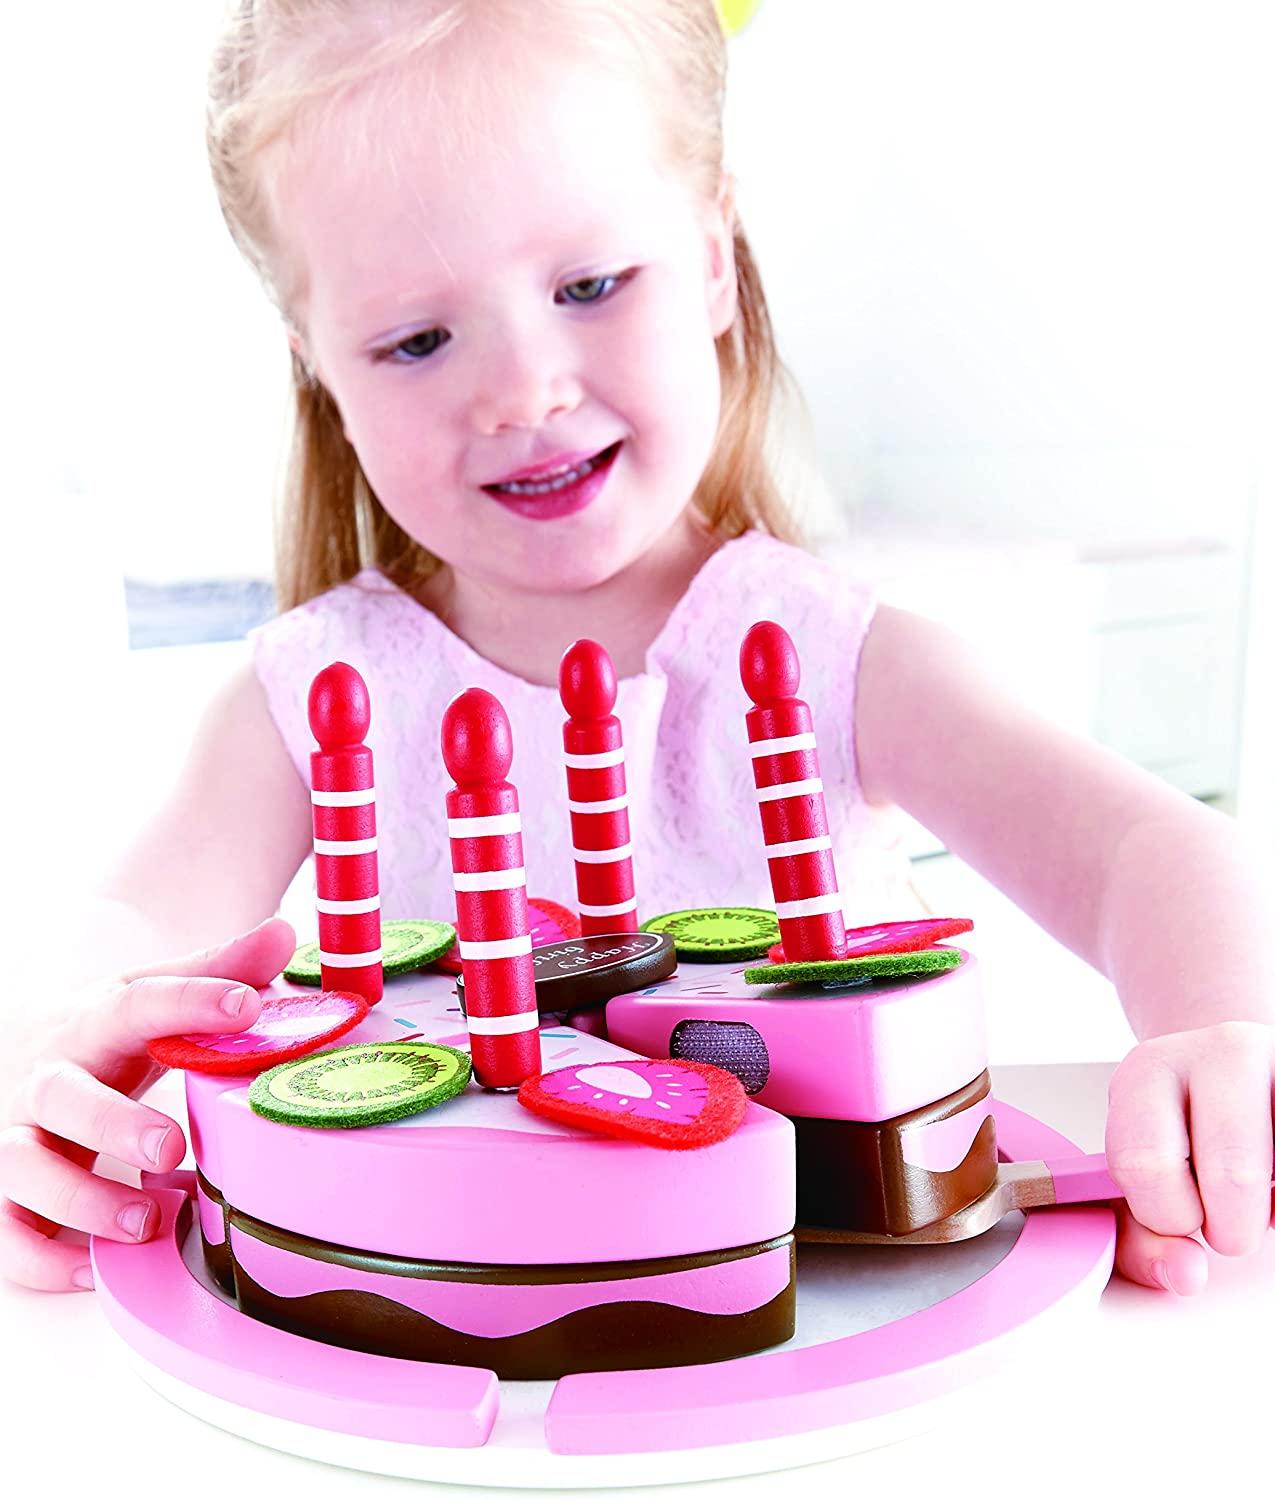 Girl playing with Birthday cake pieces